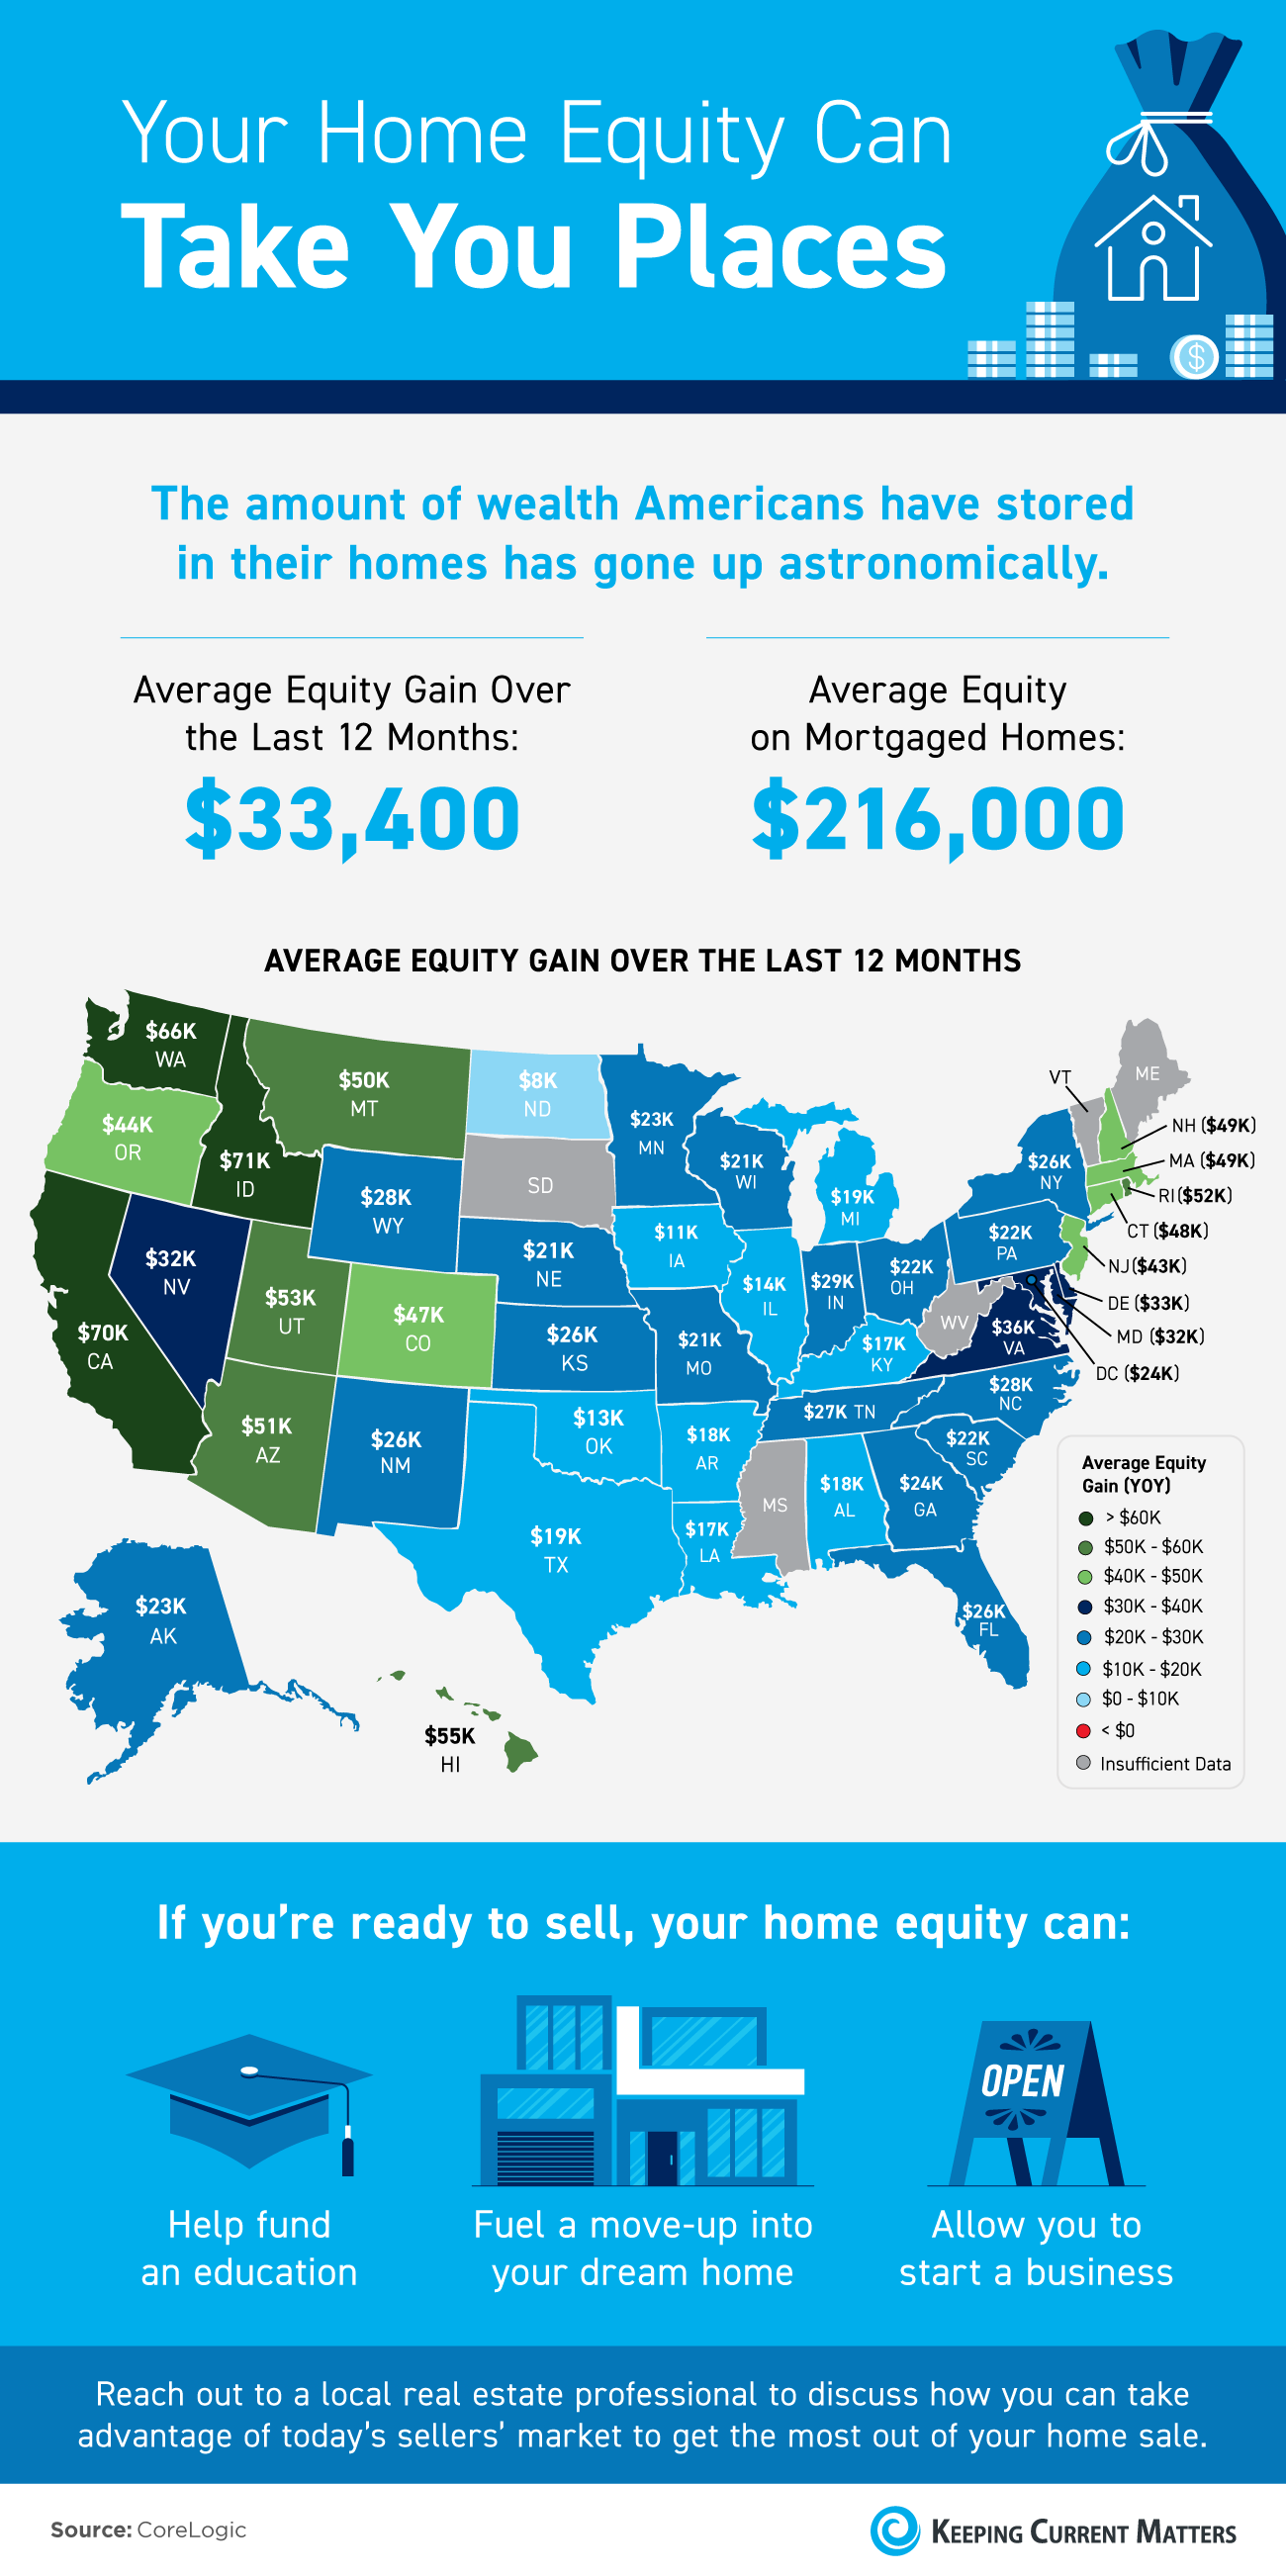 Your Home Equity Can Take You Places [INFOGRAPHIC] | Keeping Current Matters